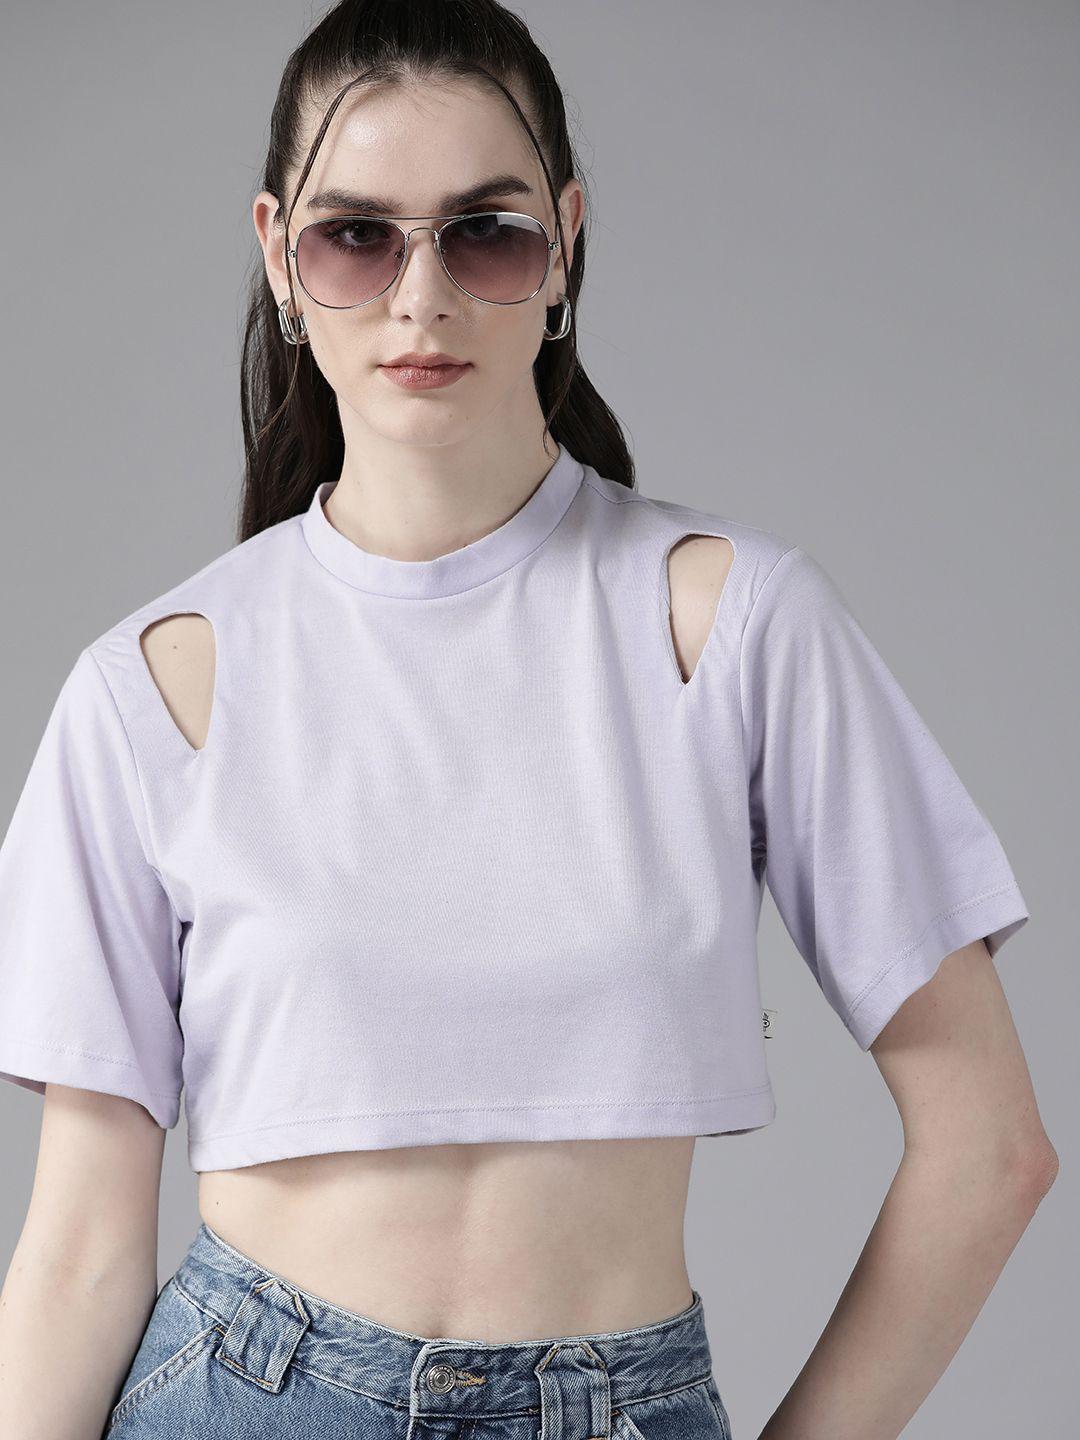 the roadster lifestyle co. cut outs crop t-shirt